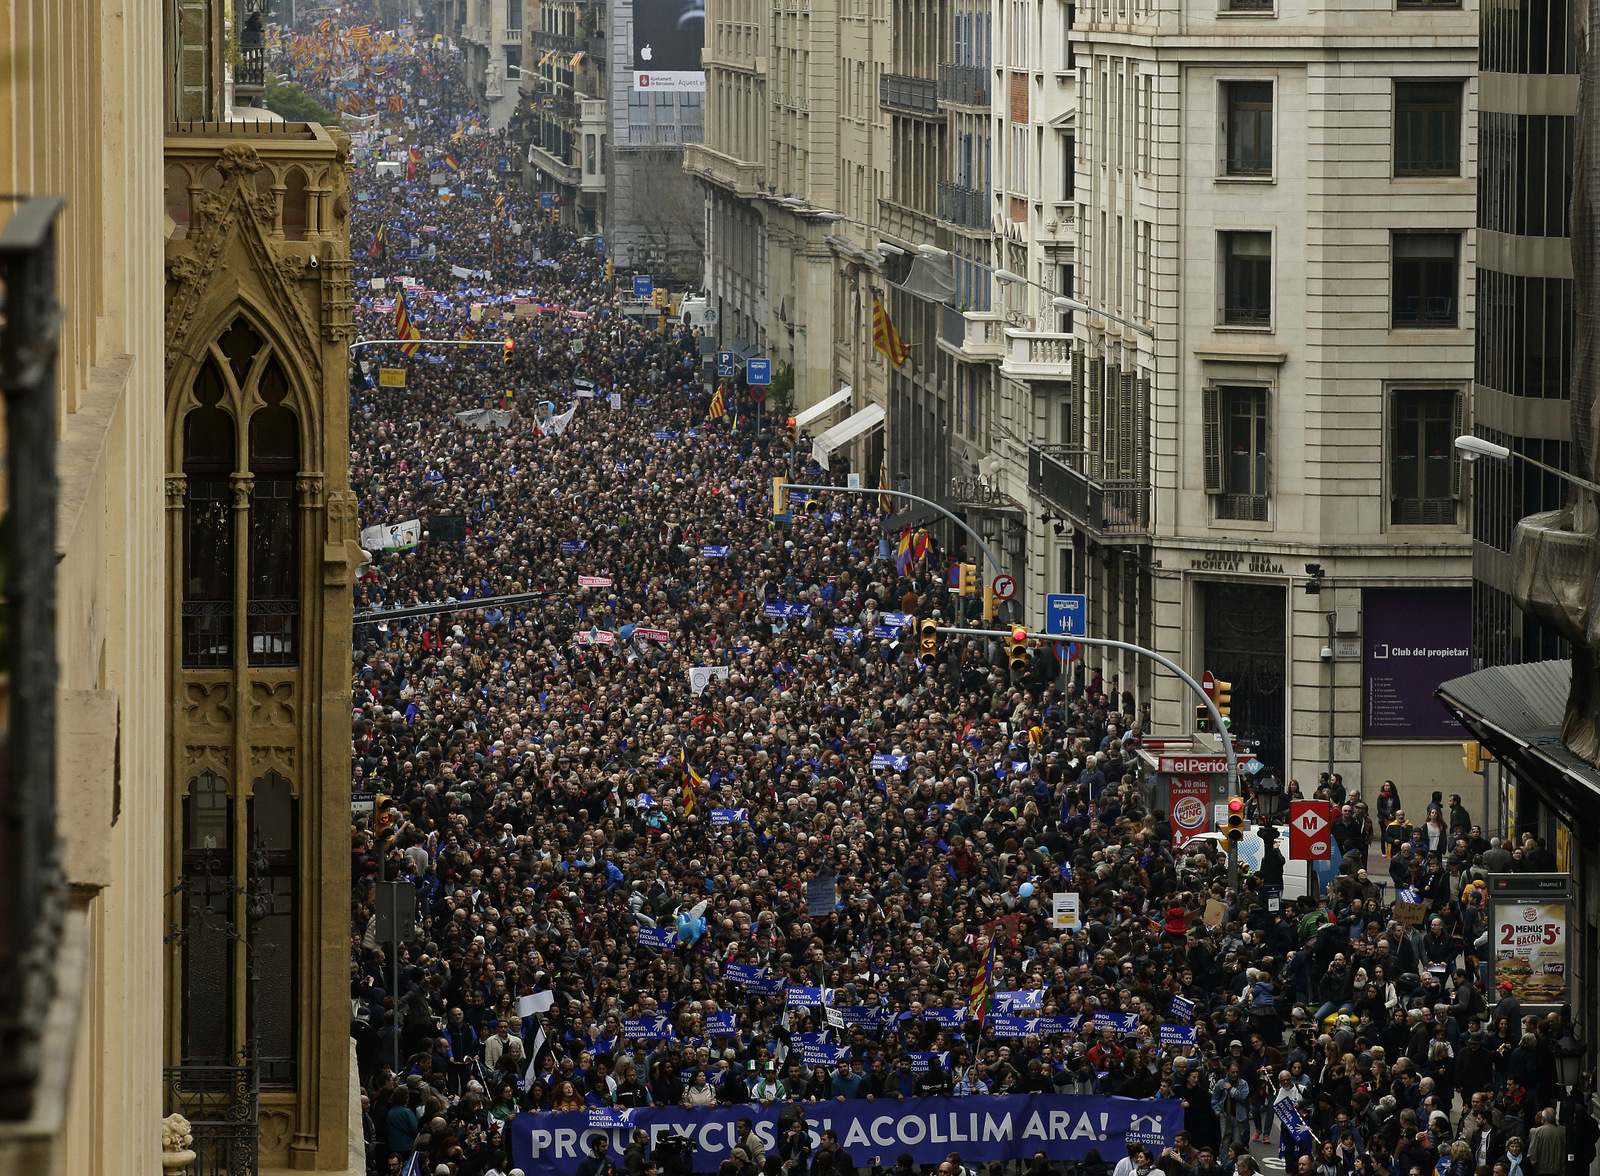 Thousands of people march to demand Spain's government to increase its efforts to take in refugees who have fled the war in Syria and other violent conflicts in Barcelona, Spain, Saturday, Feb. 18, 2017. Spain has taken in just 1,100 refugees of the over 17,000 it has pledged to accept. Banner reads in Catalan: "Enough Excuses! Take Them In Now!". (AP/Manu Fernandez)